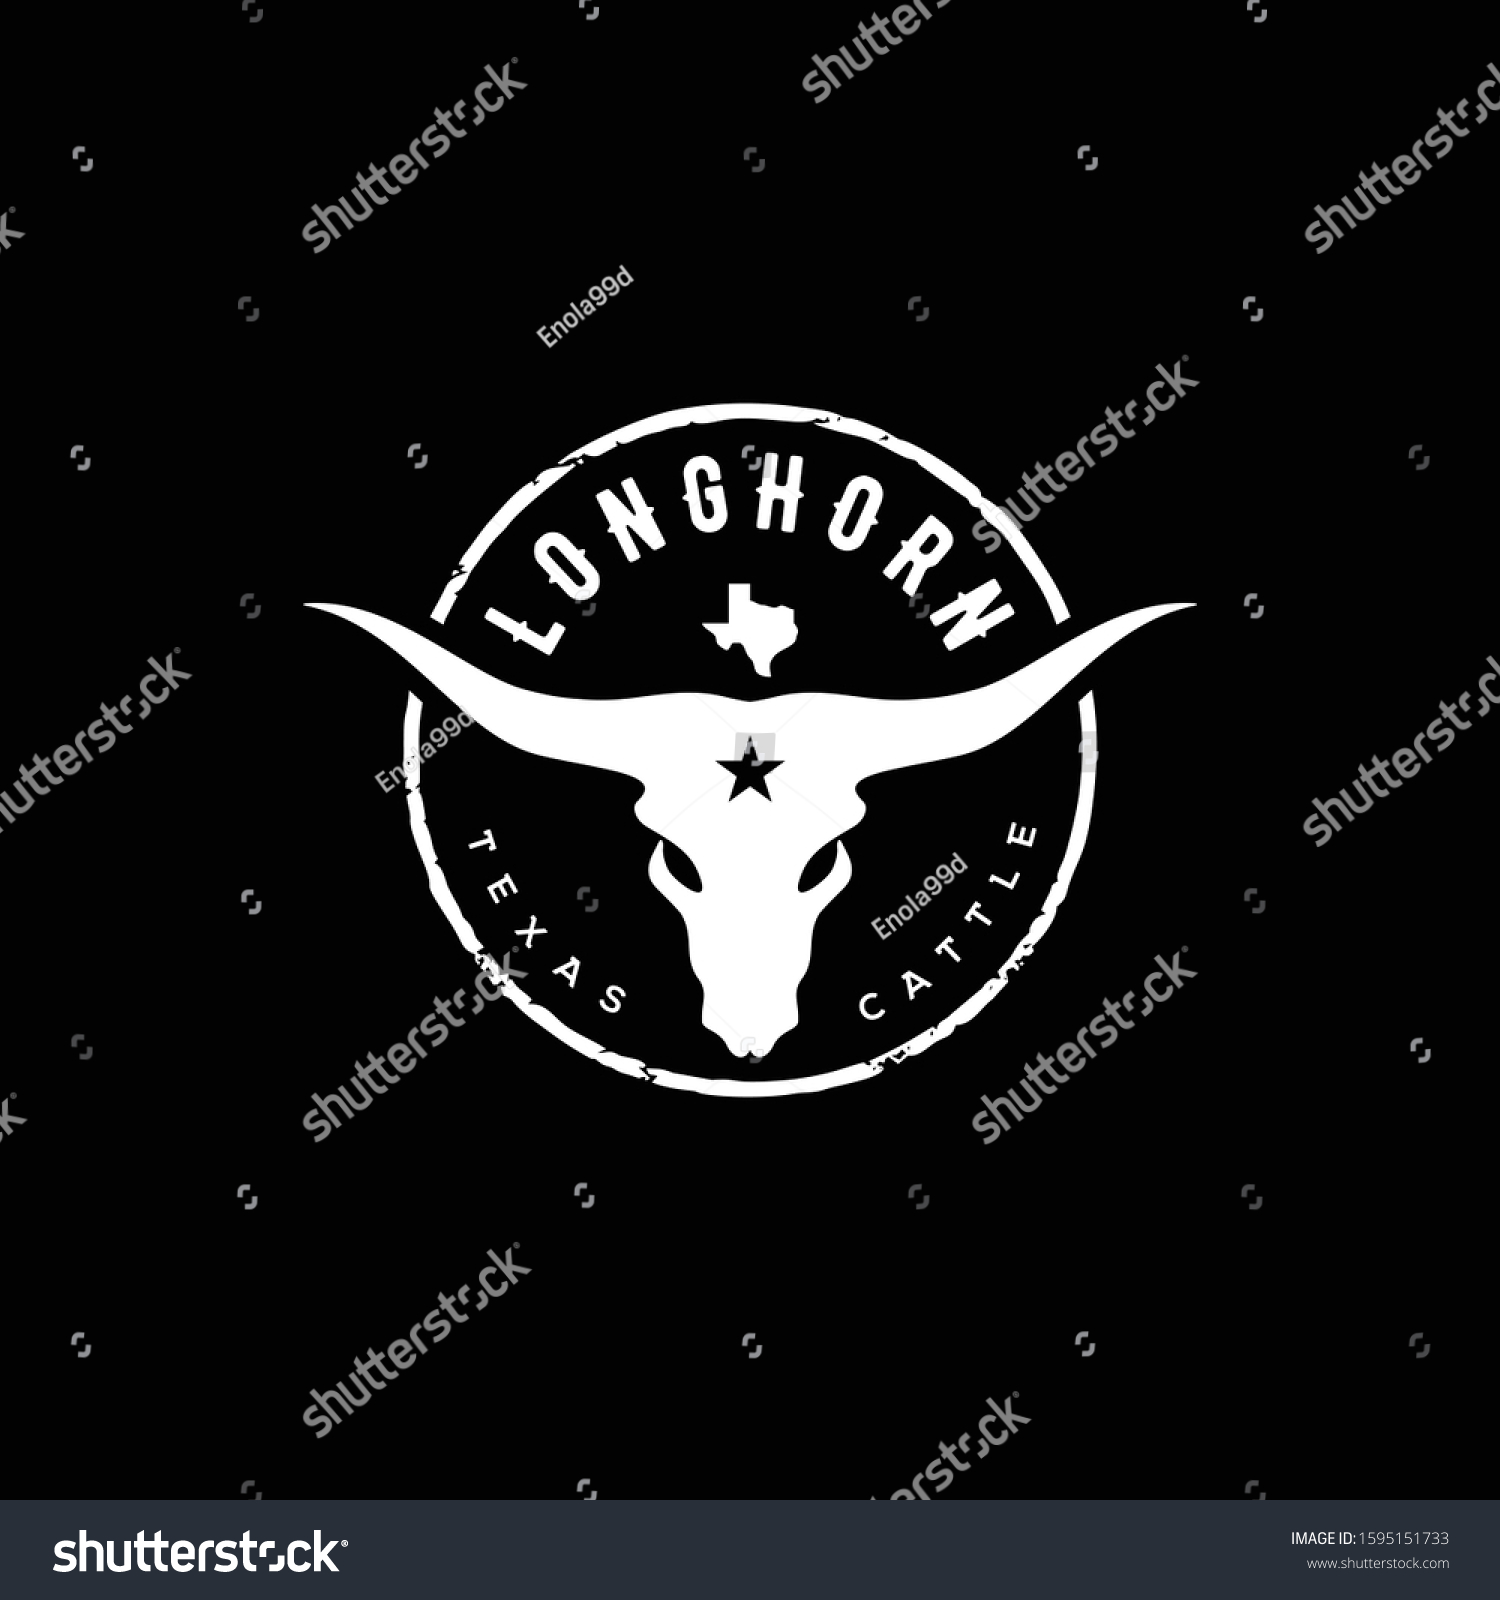 SVG of Texas Longhorn Cow, Country Western Buffalo Bull Cattle for Ranch Countryside Farm Vintage Label Logo Design svg